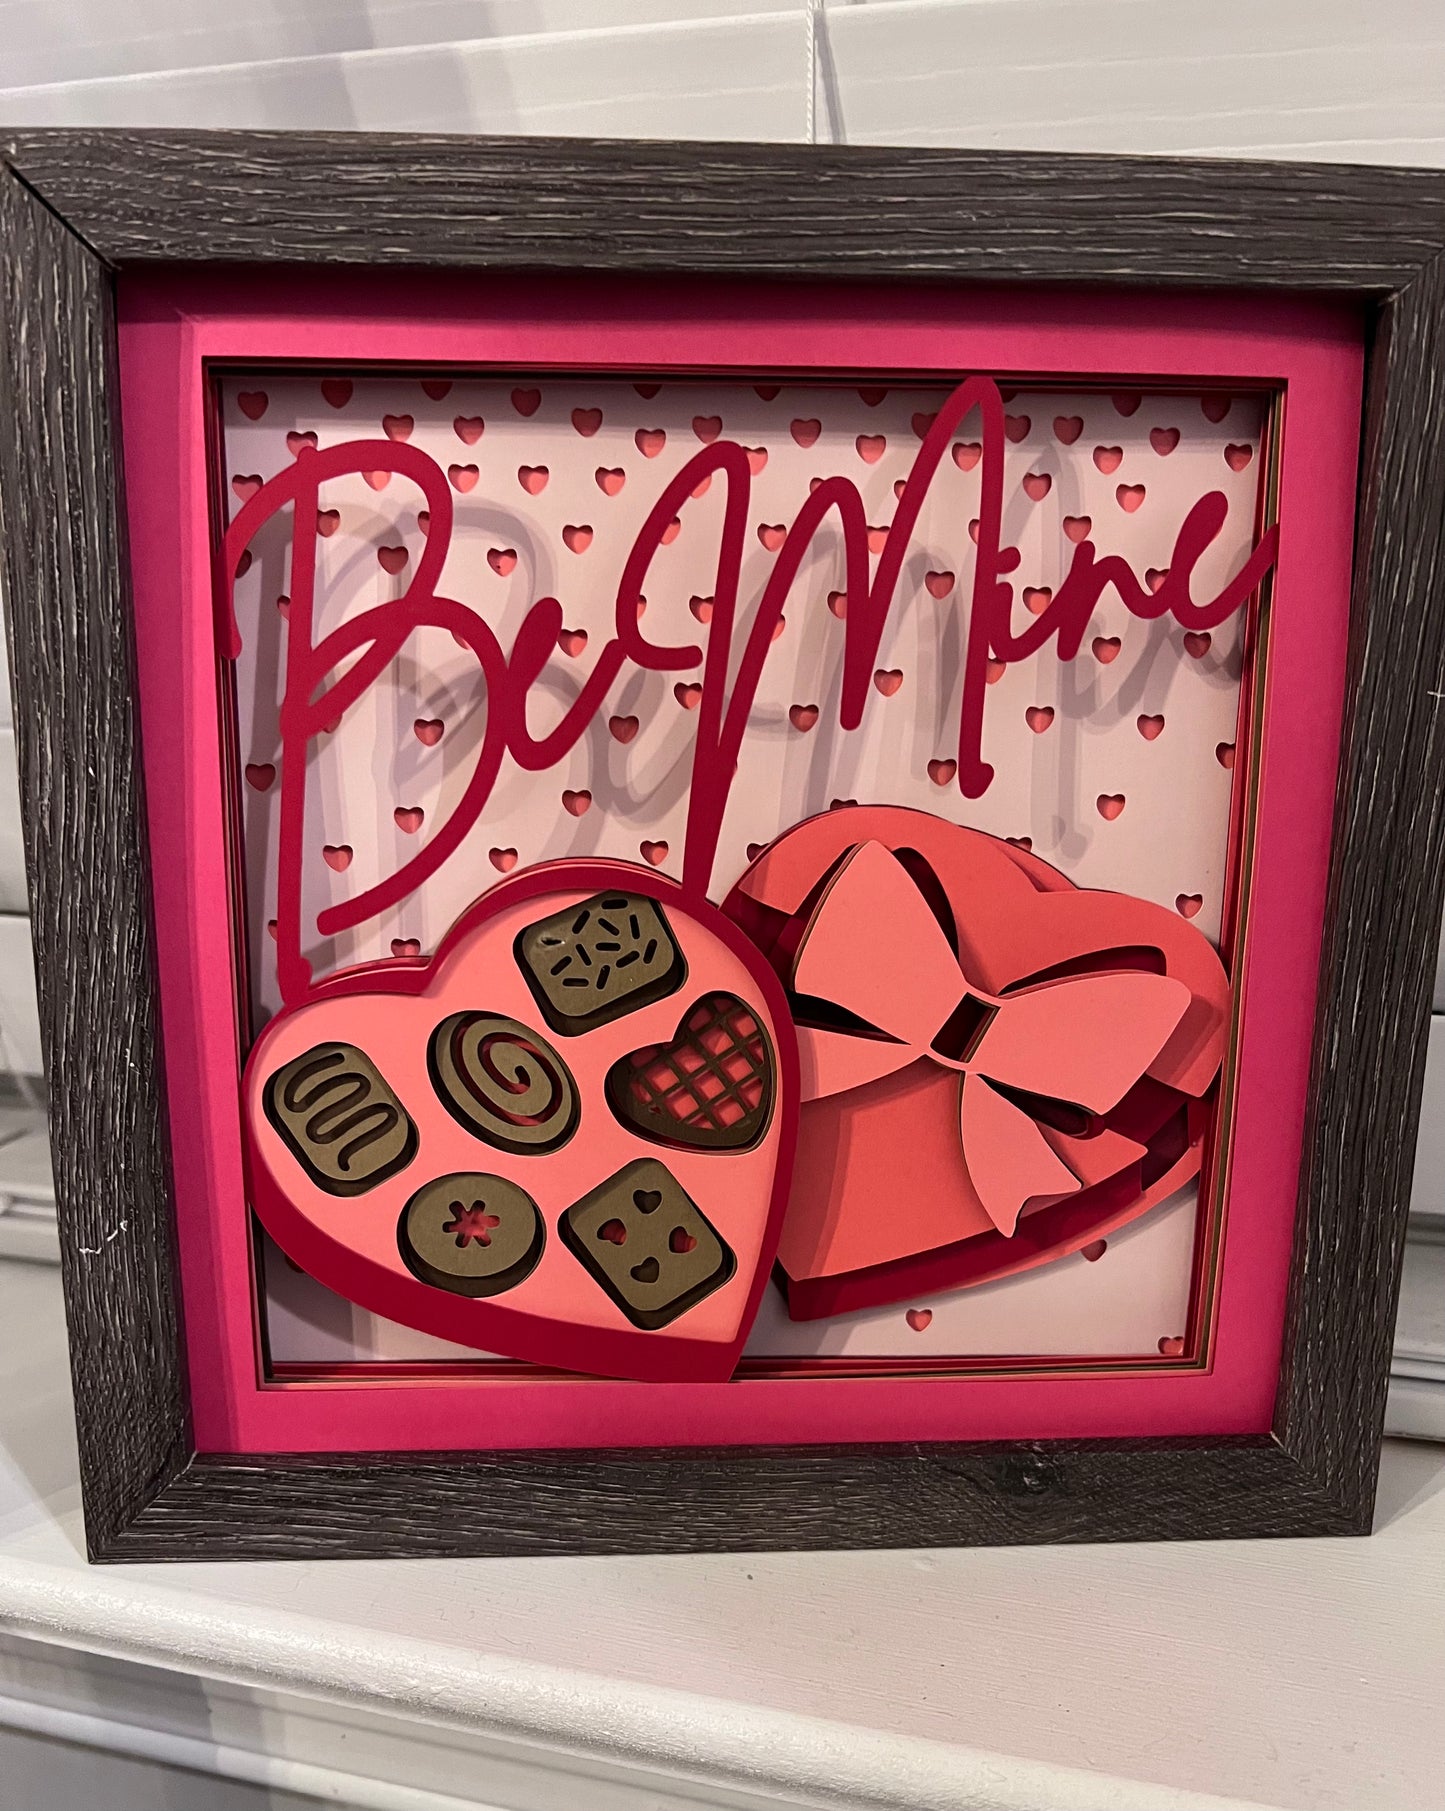 Box of chocolates 3D paper art in a shadowbox